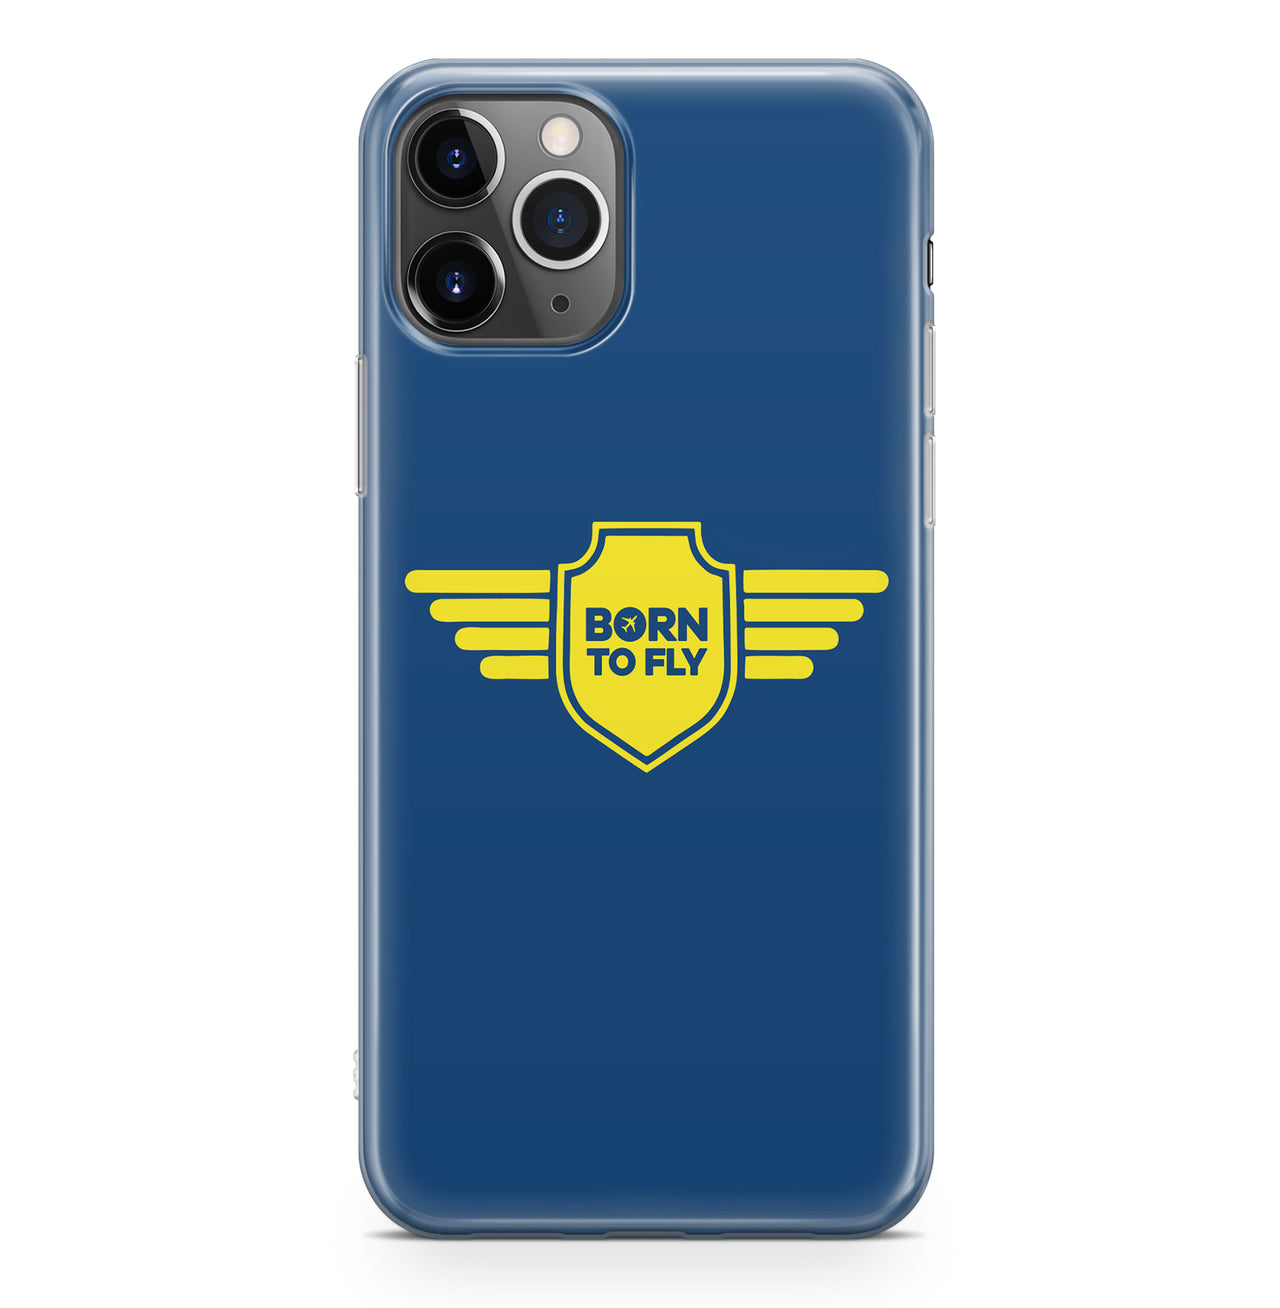 Born To Fly & Badge Designed iPhone Cases